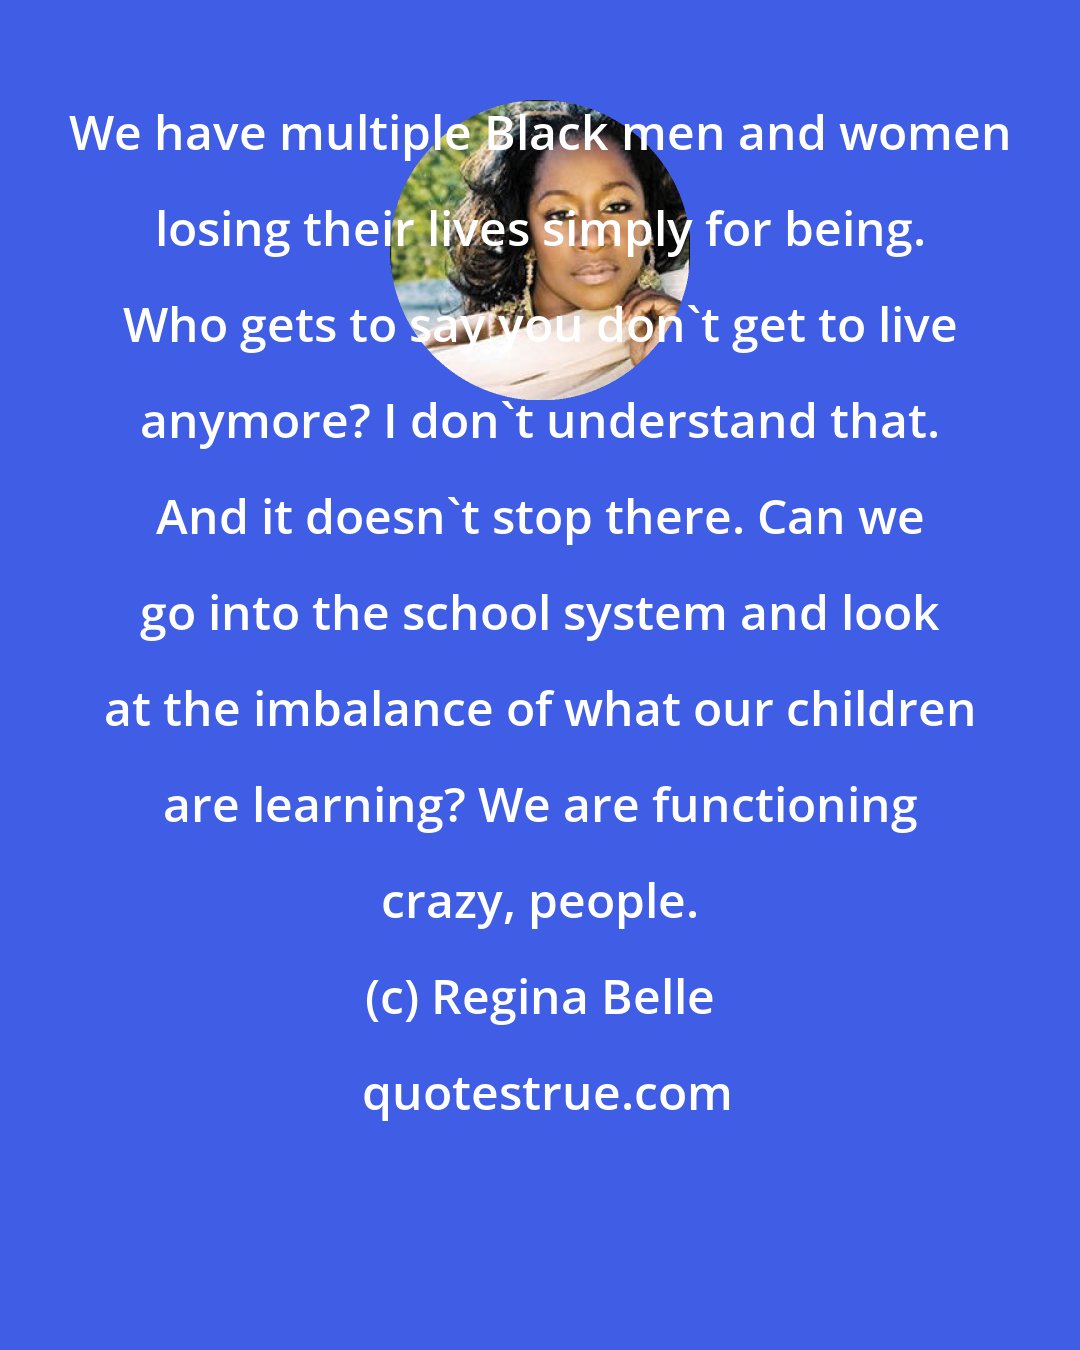 Regina Belle: We have multiple Black men and women losing their lives simply for being. Who gets to say you don't get to live anymore? I don't understand that. And it doesn't stop there. Can we go into the school system and look at the imbalance of what our children are learning? We are functioning crazy, people.